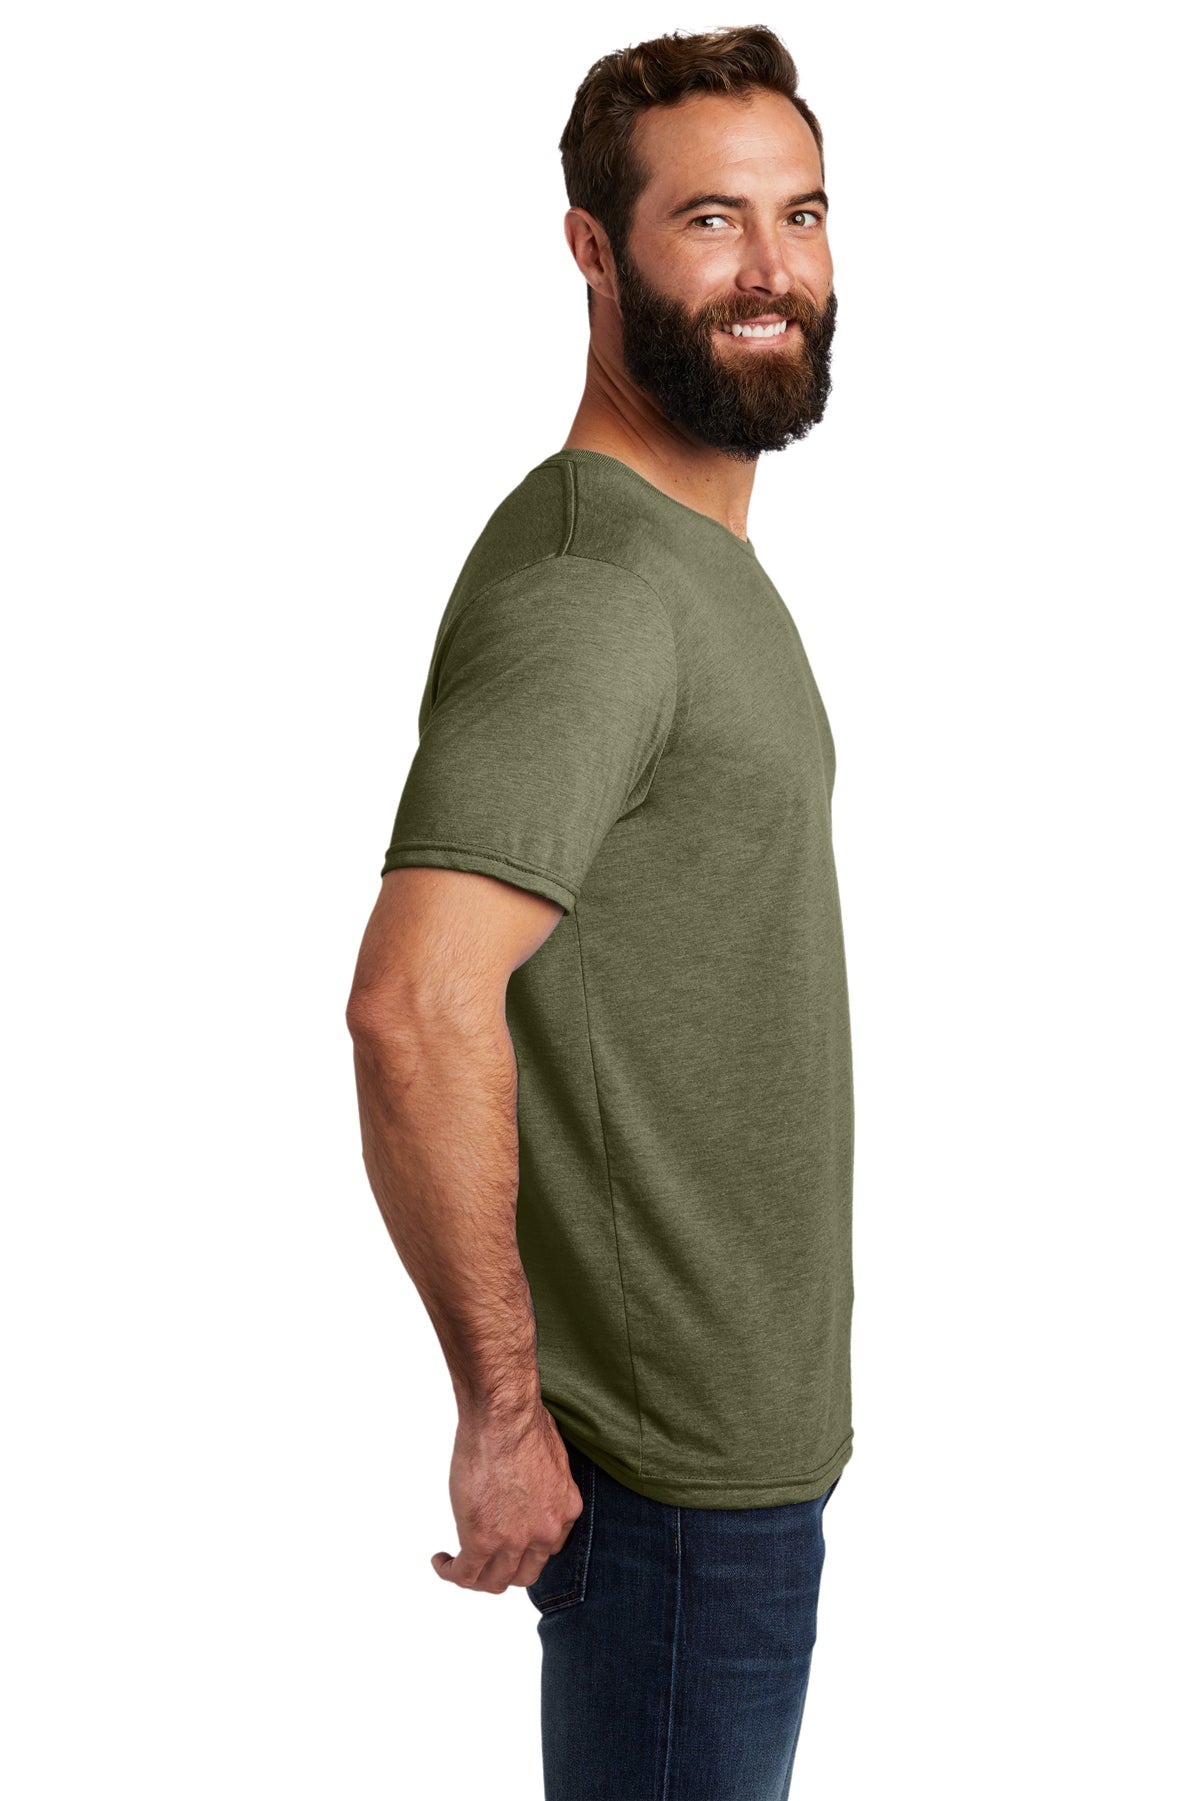 Allmade Unisex Tri-Blend Customized Tee, Olive You Green